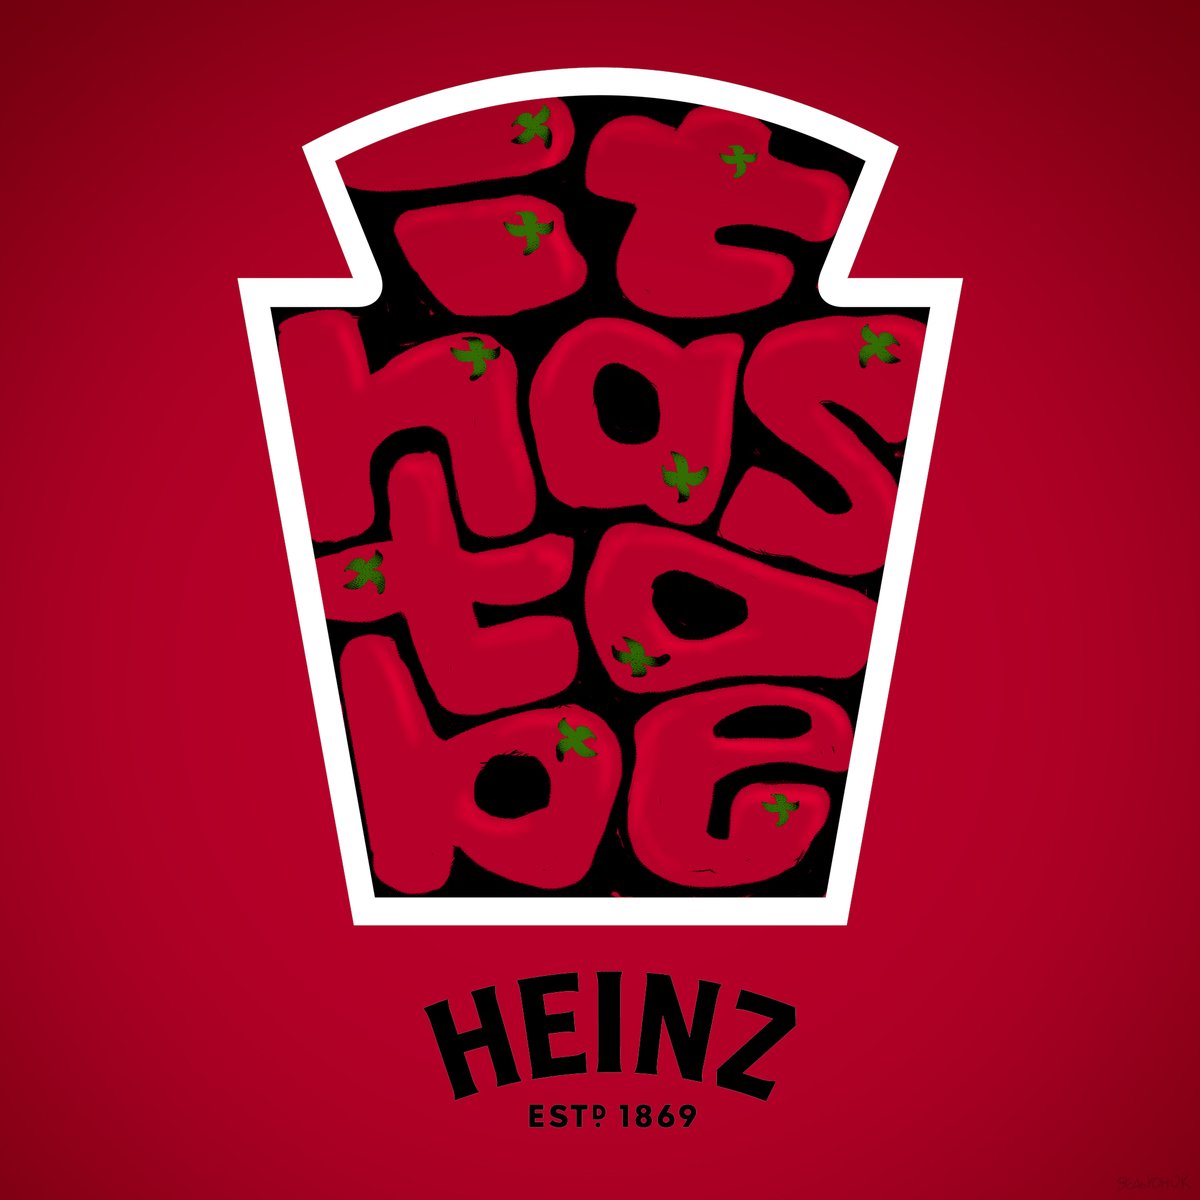 Create posters/labels featuring the @HeinzUK
  ‘keystone’ logo outline to show the nation’s love for Heinz Tomato Ketchup and why #ItHasToBeHeinz 

Loving tom'art'os...